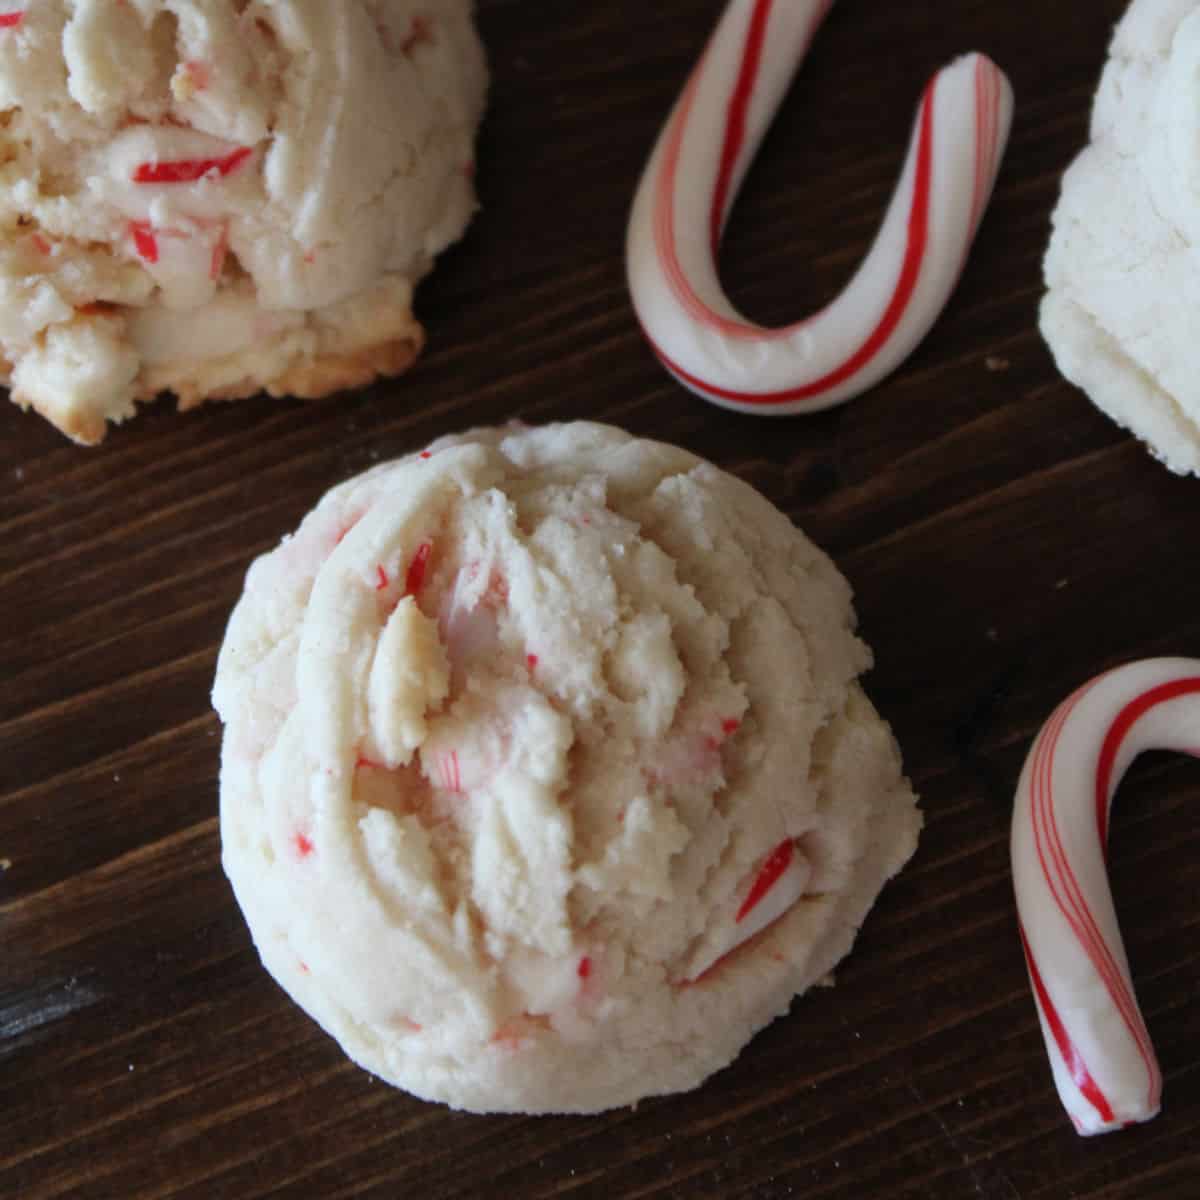 White Chocolate Candy Cane Cookies and candy canes on a wooden board